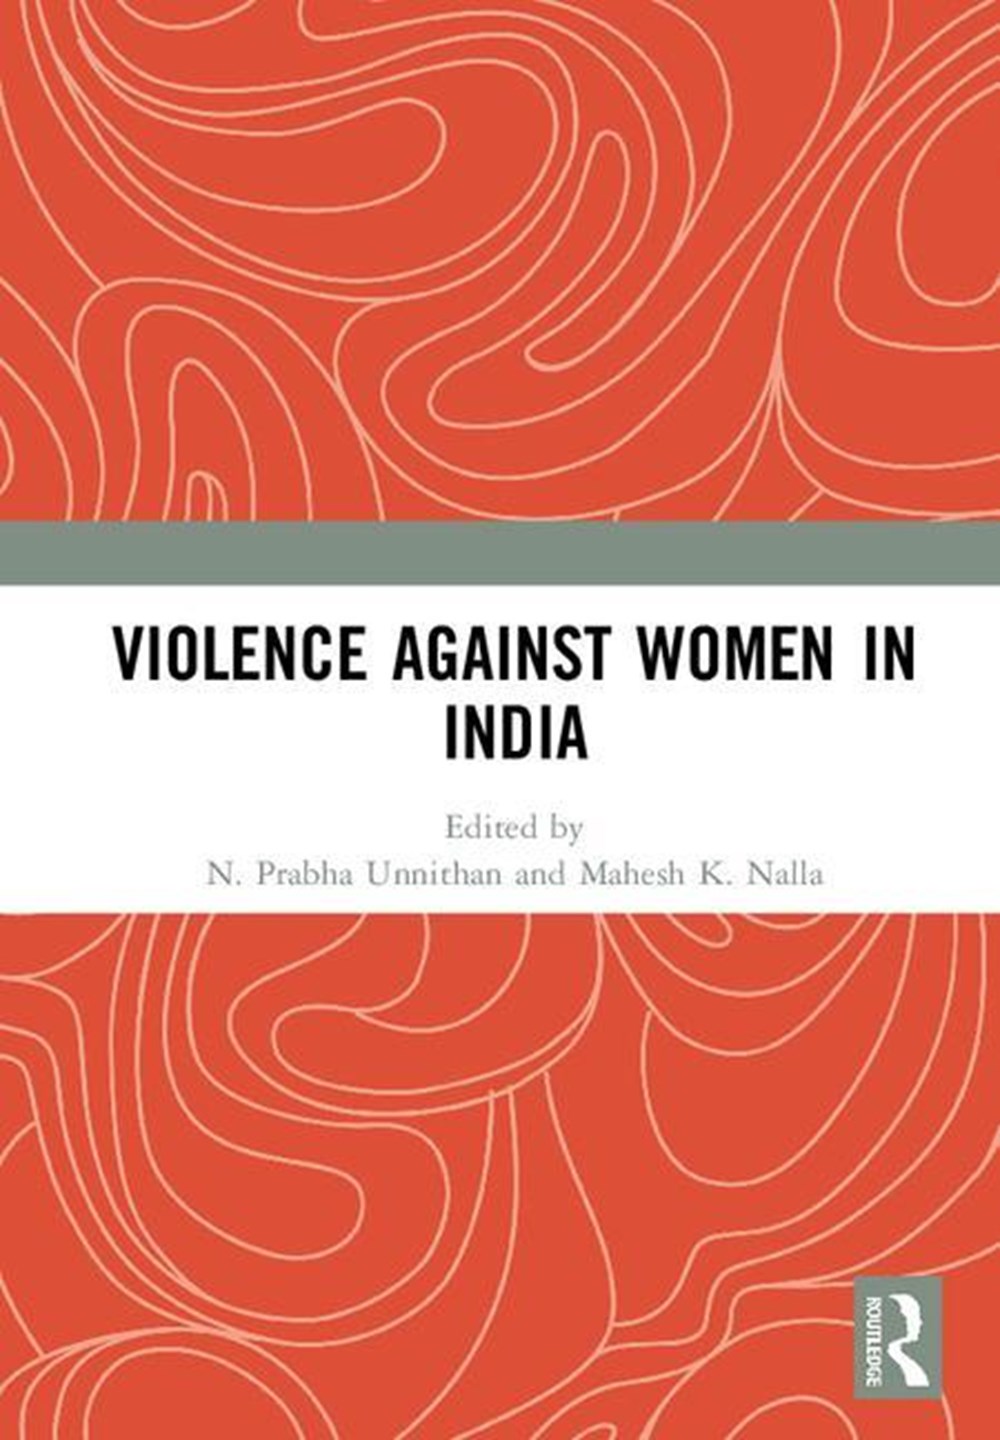 Violence Against Women in India